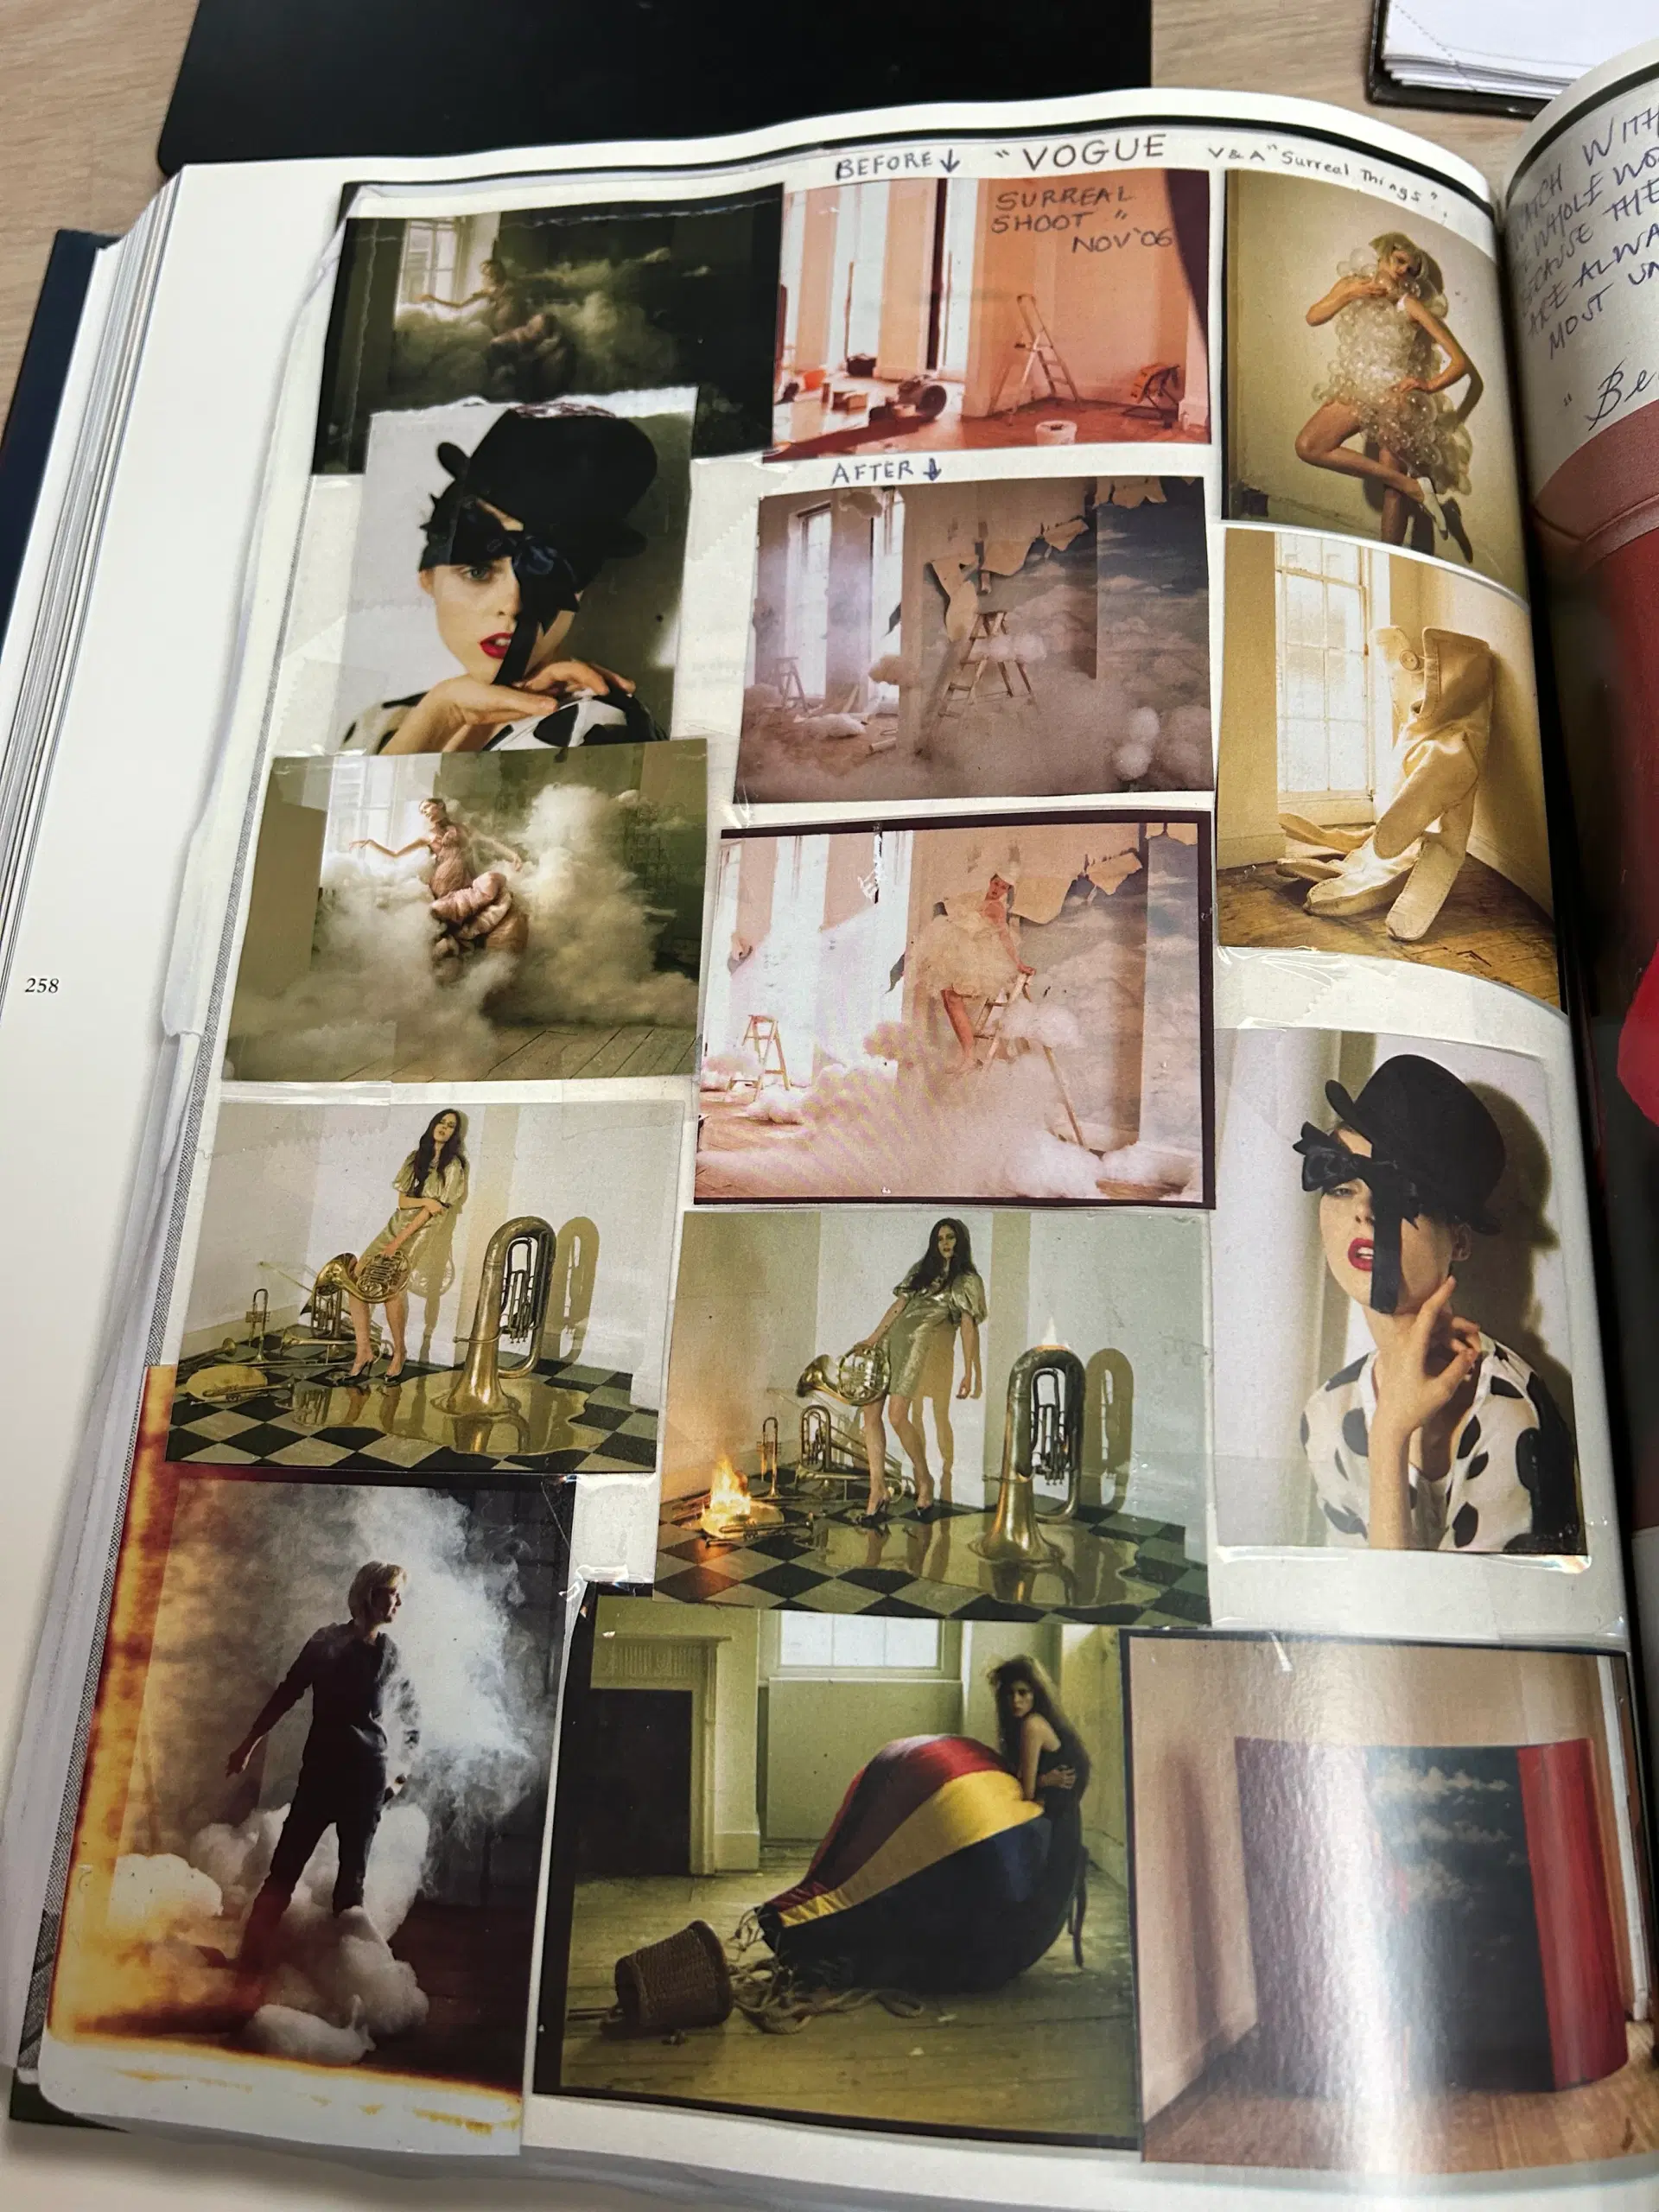 TIM WALKER “Pictures” Coffe table book